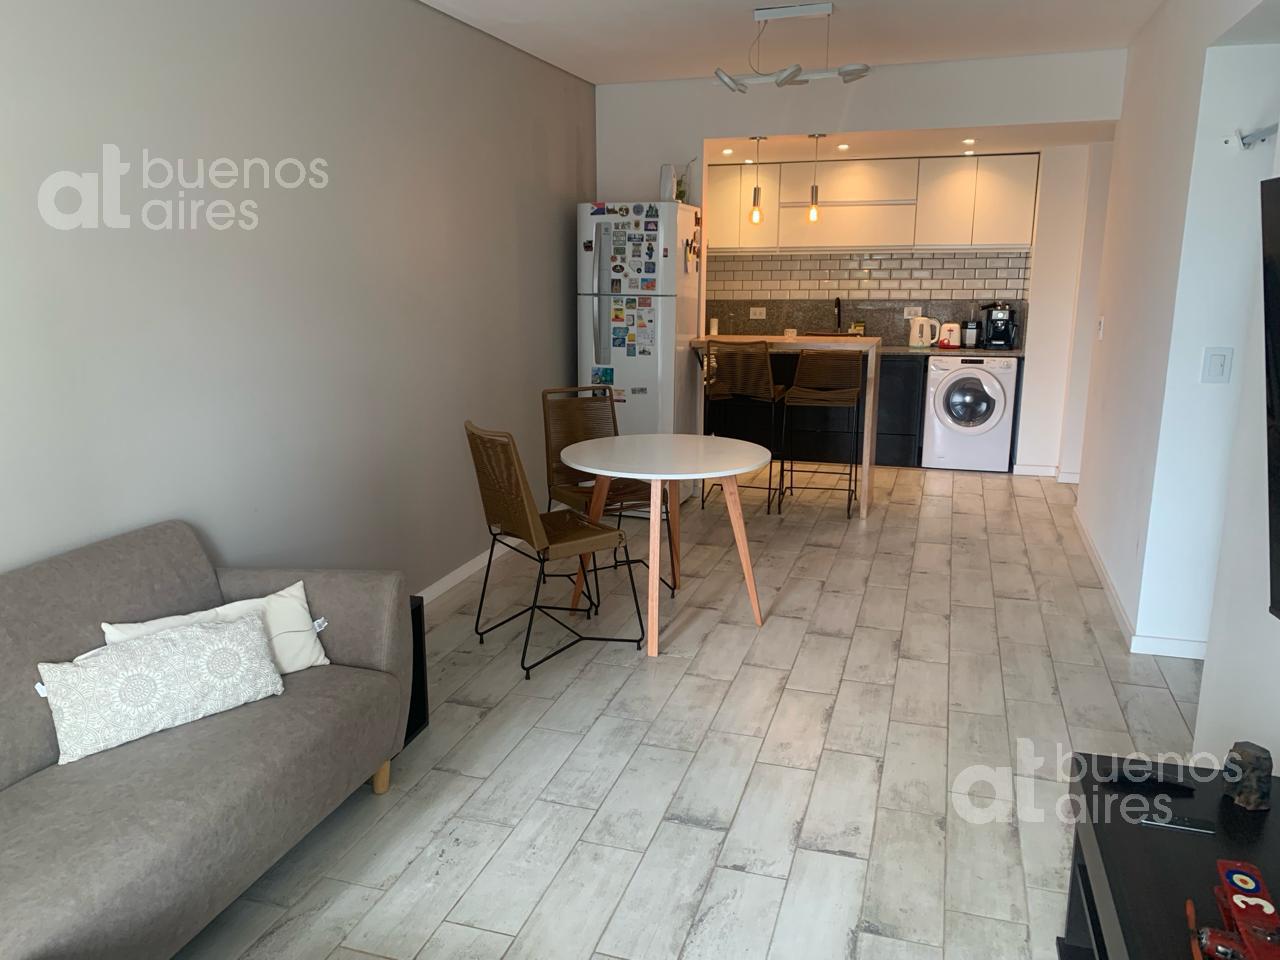 #5122113 | Temporary Rental | Apartment | Palermo (At Buenos Aires)